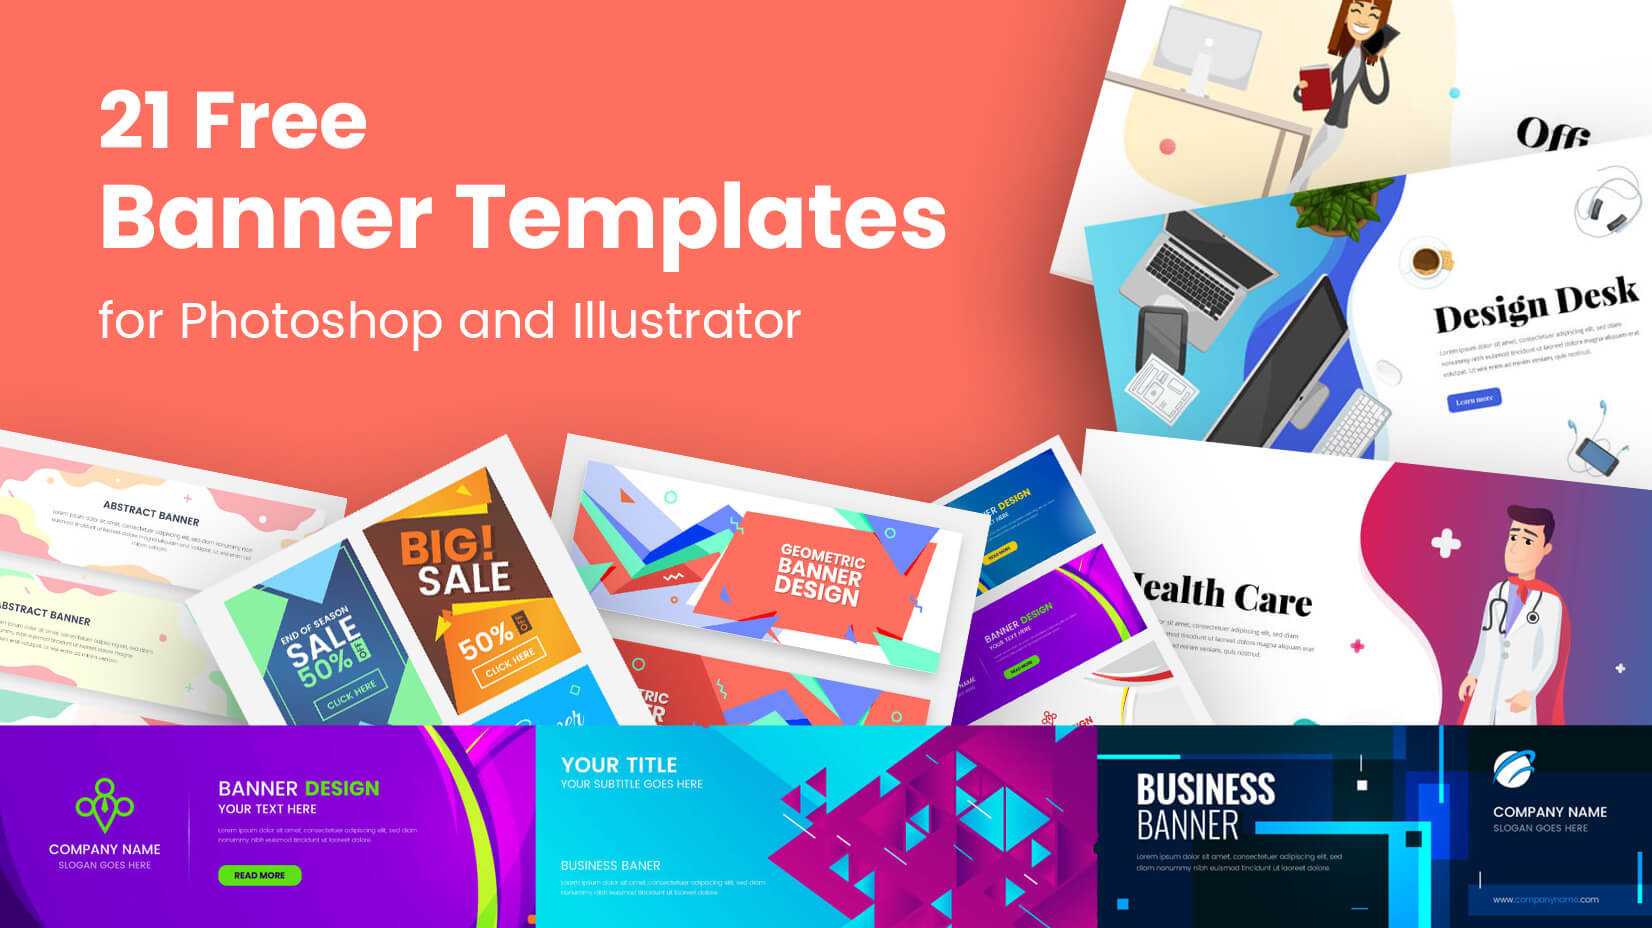 21 Free Banner Templates For Photoshop And Illustrator With Adobe Photoshop Banner Templates